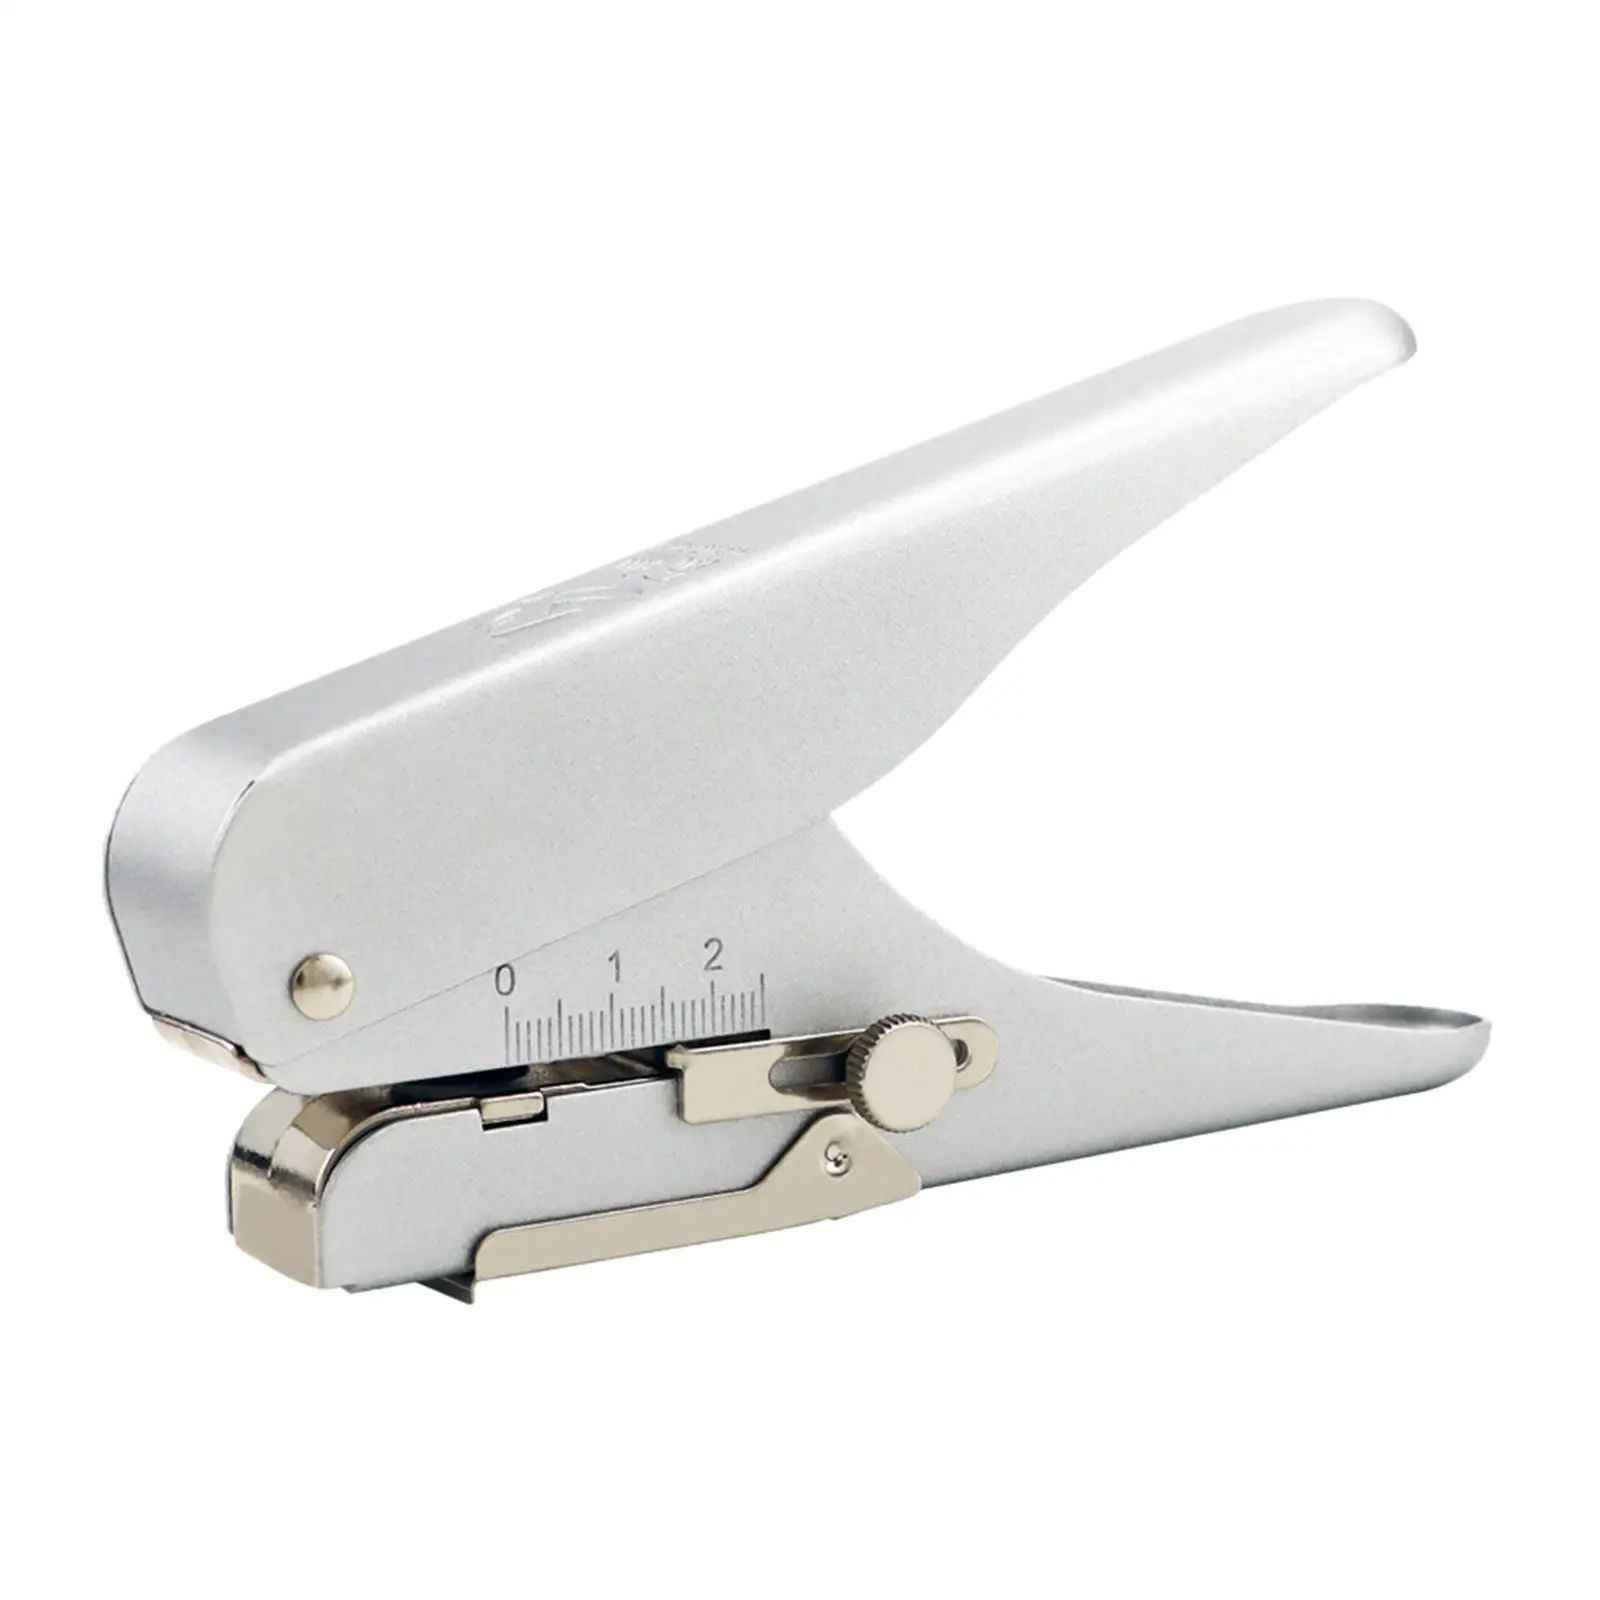 Hole Punch Plier Alloy Punching Tool Heavy Duty Tools Adjustable Hole Puncher for Card Wood Veneer Woodworking Paper